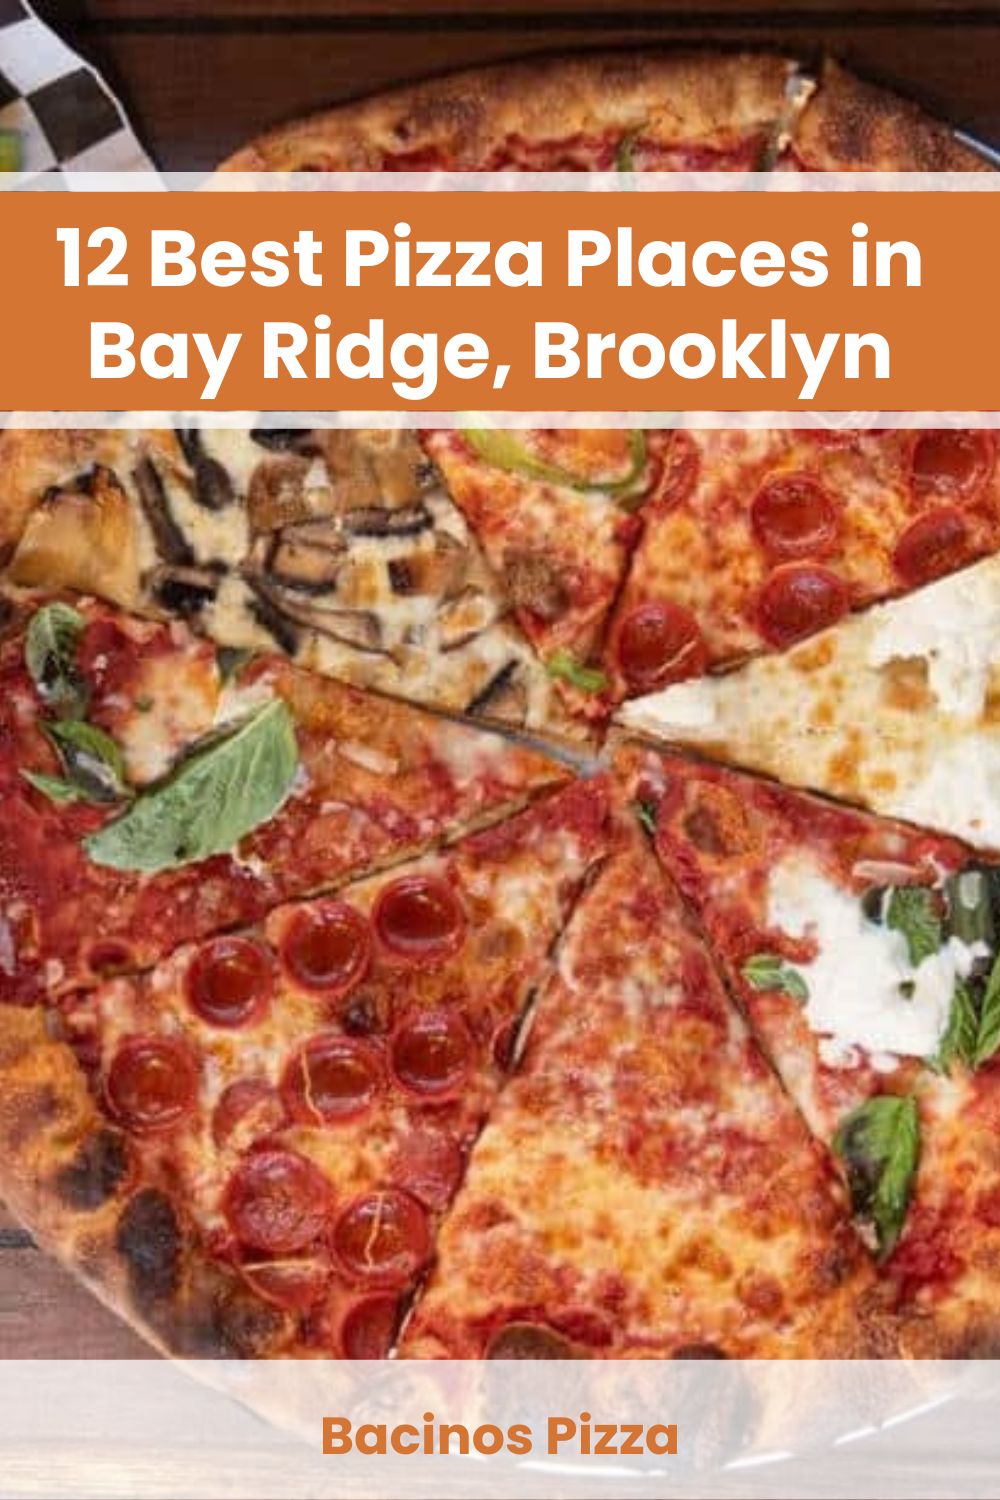 Best Pizza Places in Bay Ridge